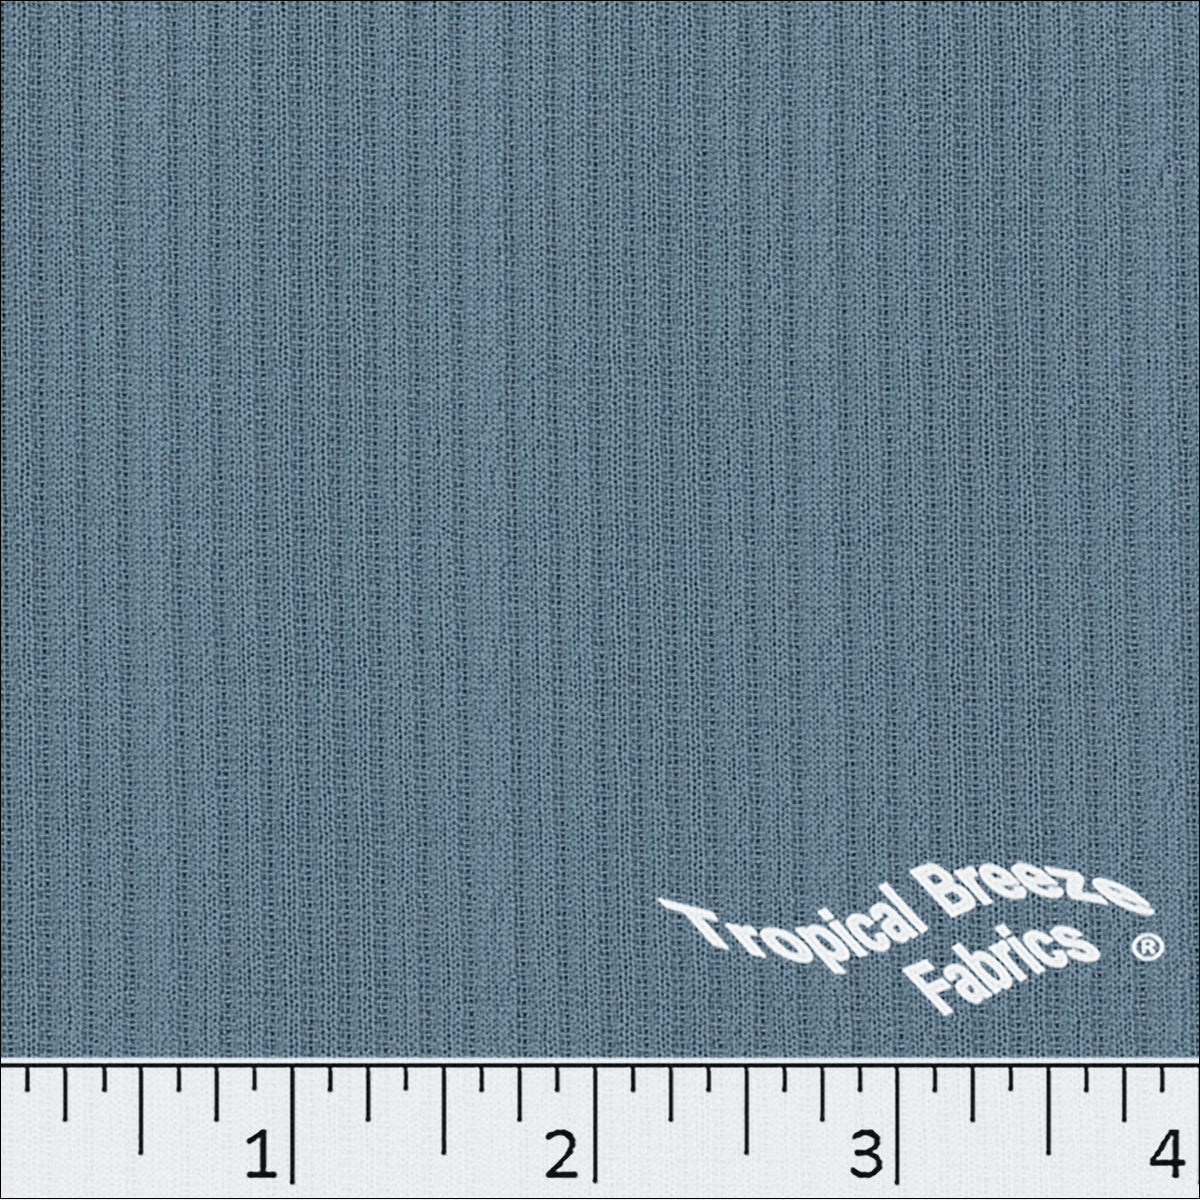 Polyester Wool Fabric Brushed Coating 59 inch Inches Wide Soft by The Yard Medium Heavy Weight (Royal Blue)